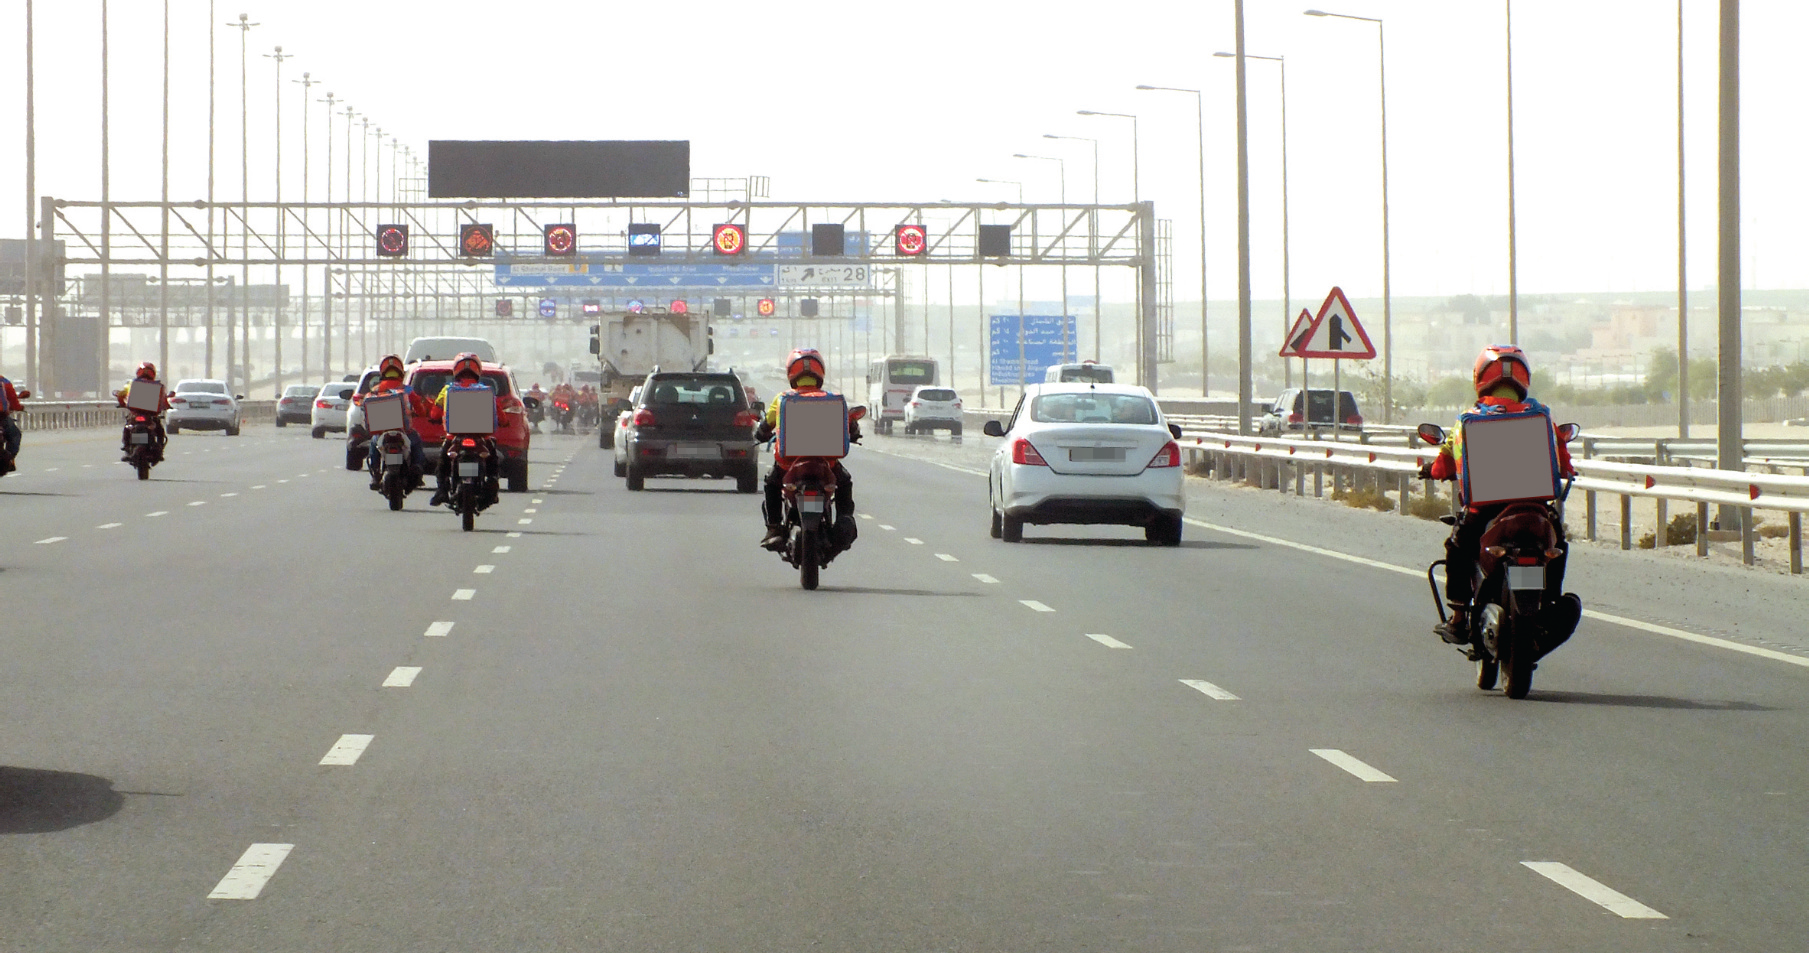 Do motorbike delivery drivers pose a threat to road safety?